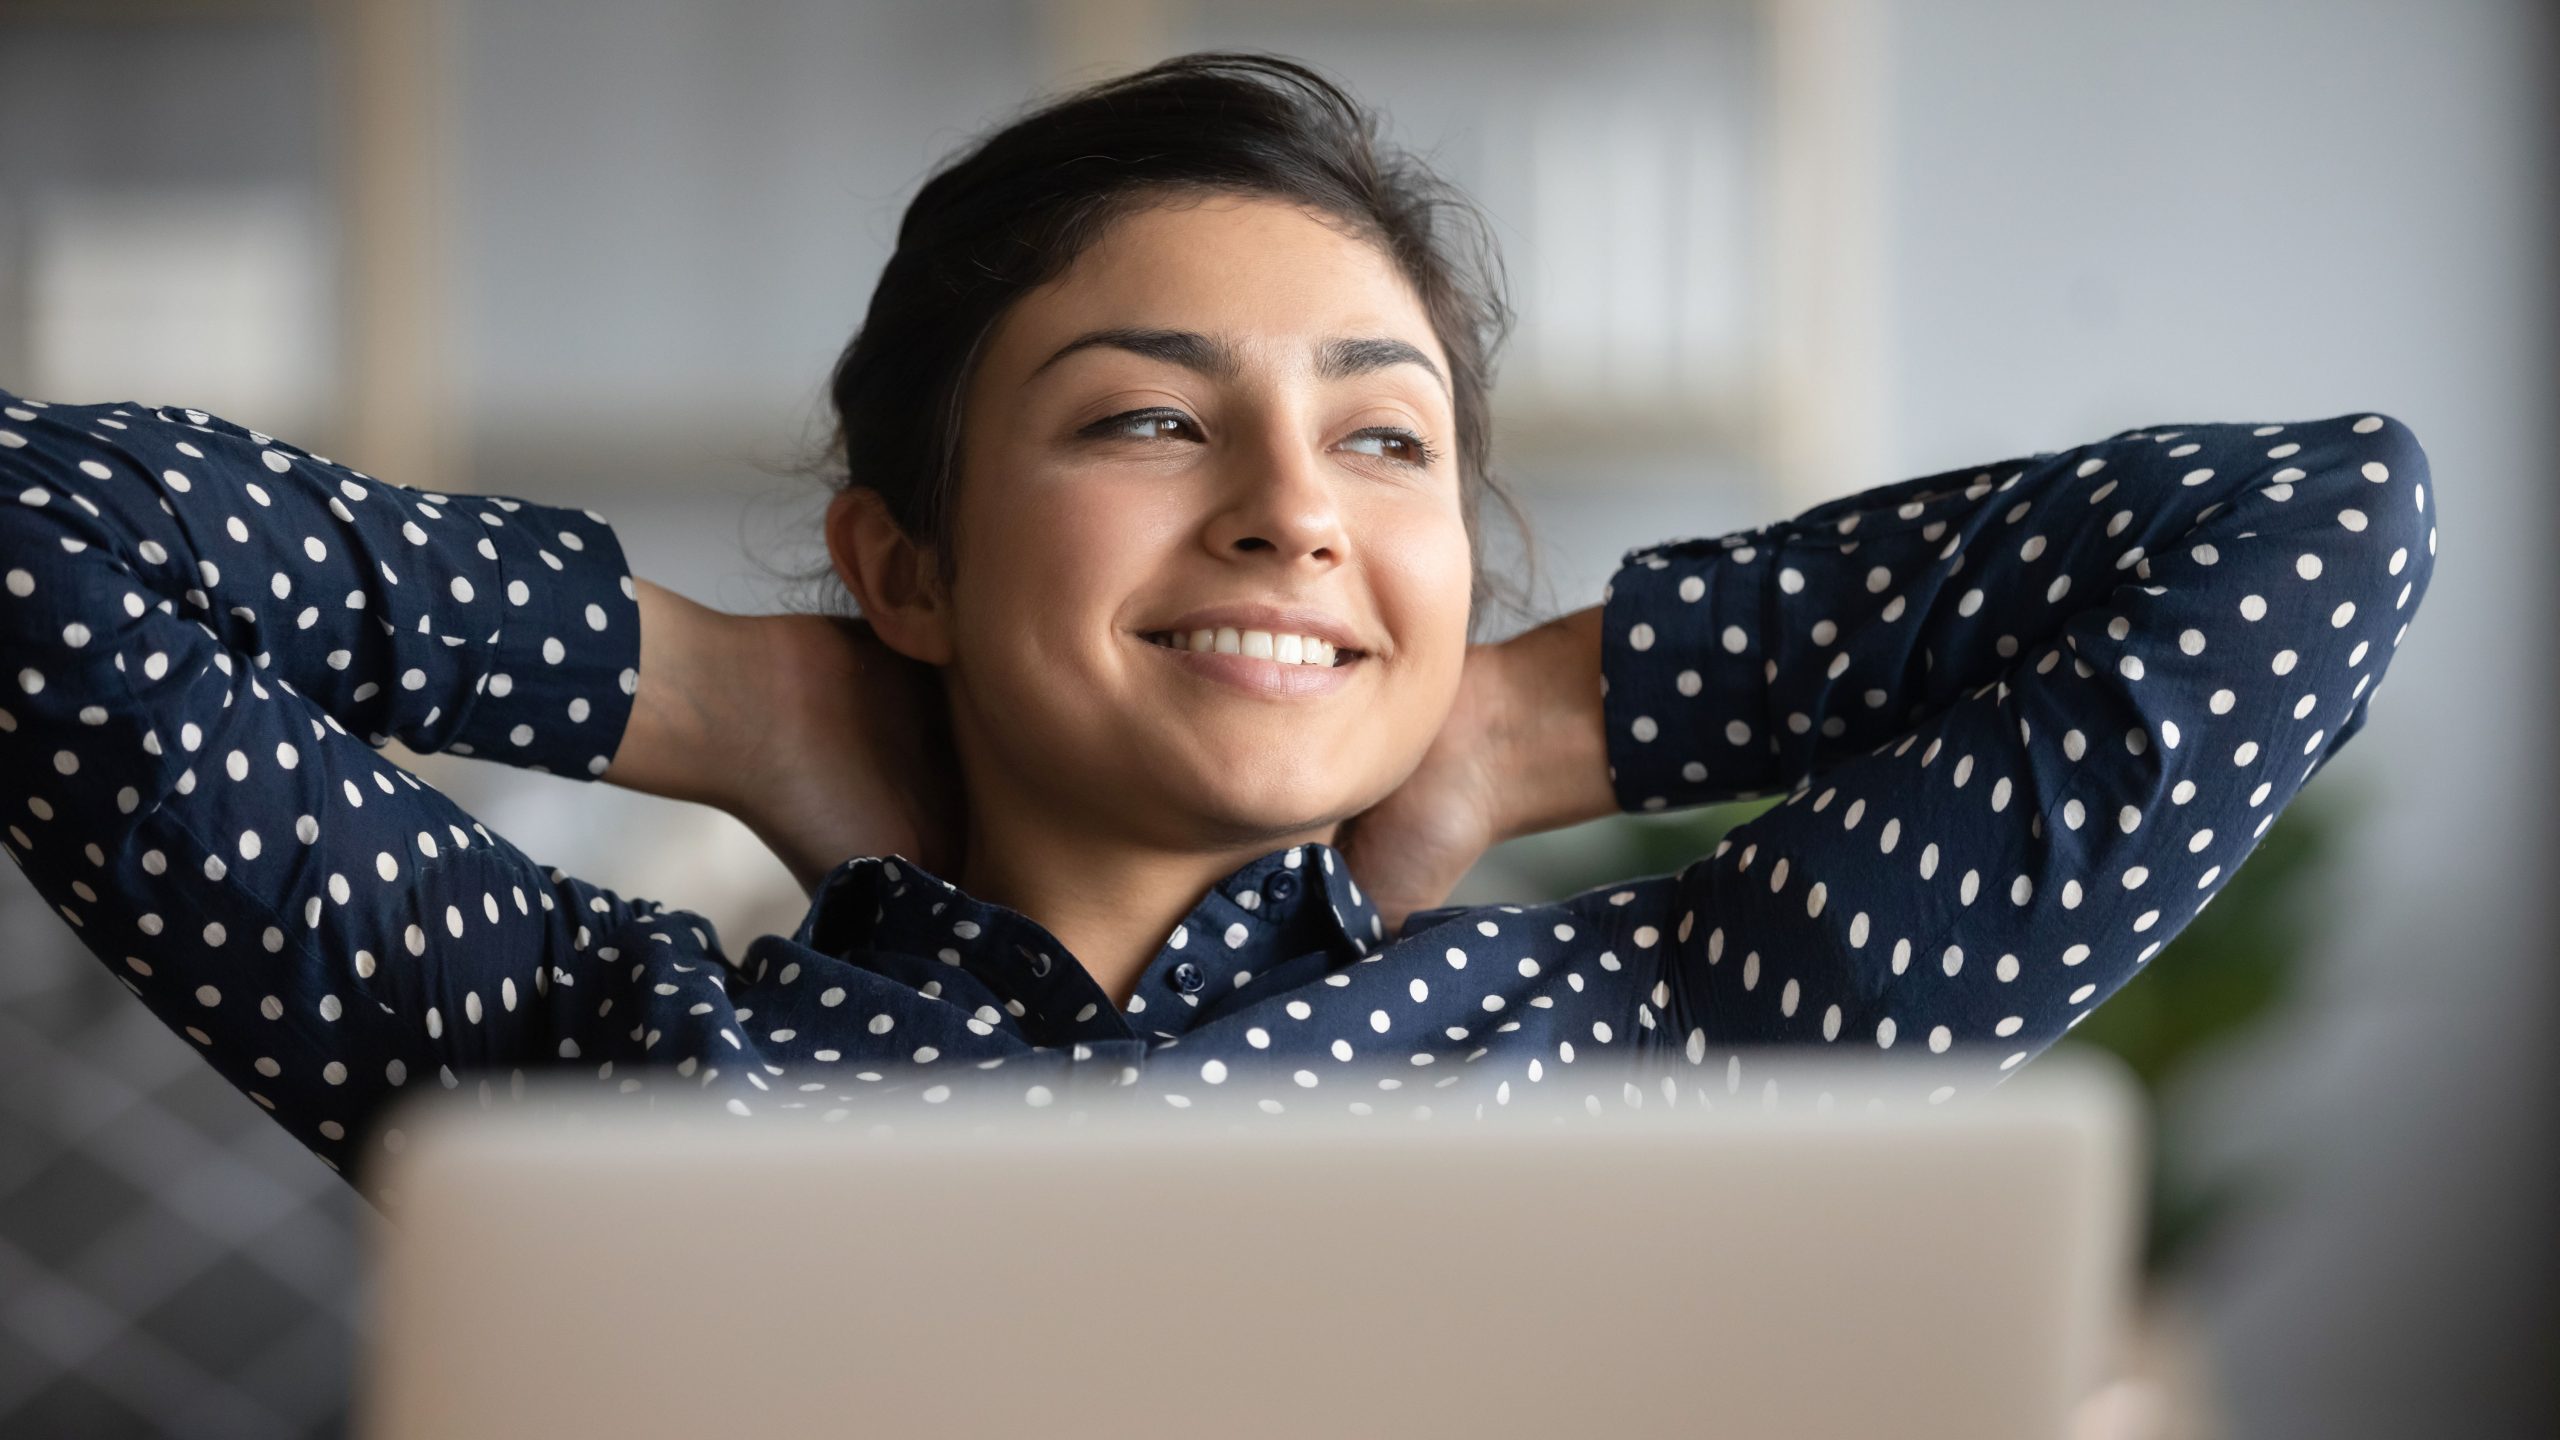 Content young woman in a polka-dot shirt relaxing with hands behind head, gazing away, in front of a laptop.